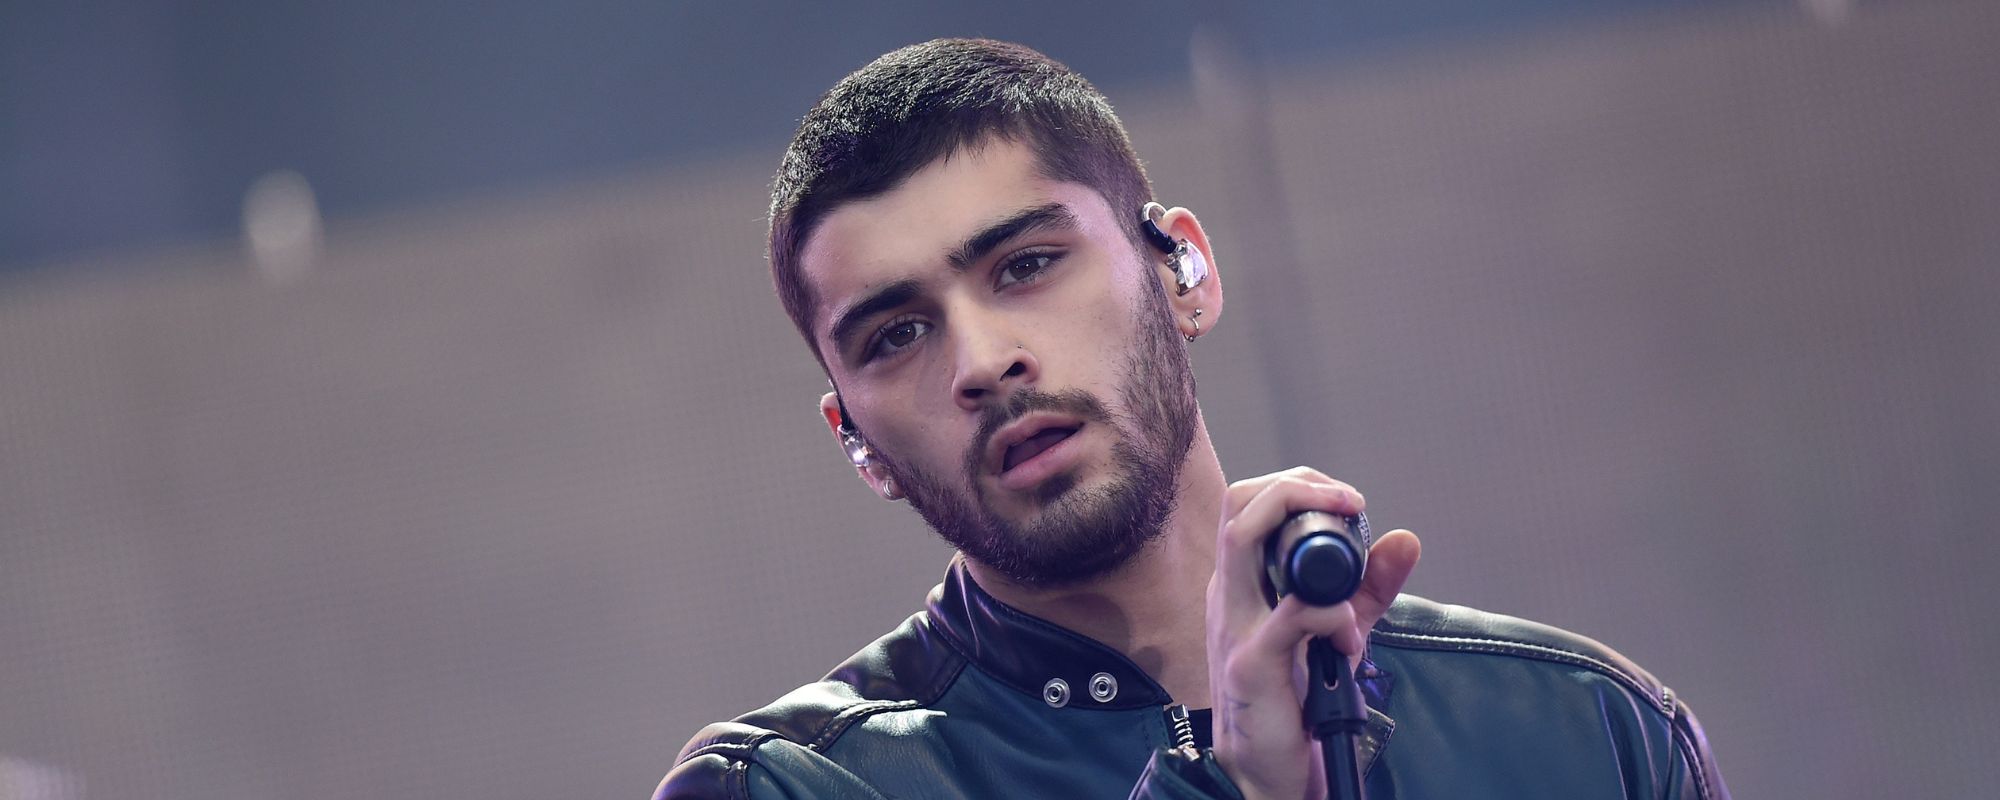 Behind the Beef: Zayn Malik and One Direction